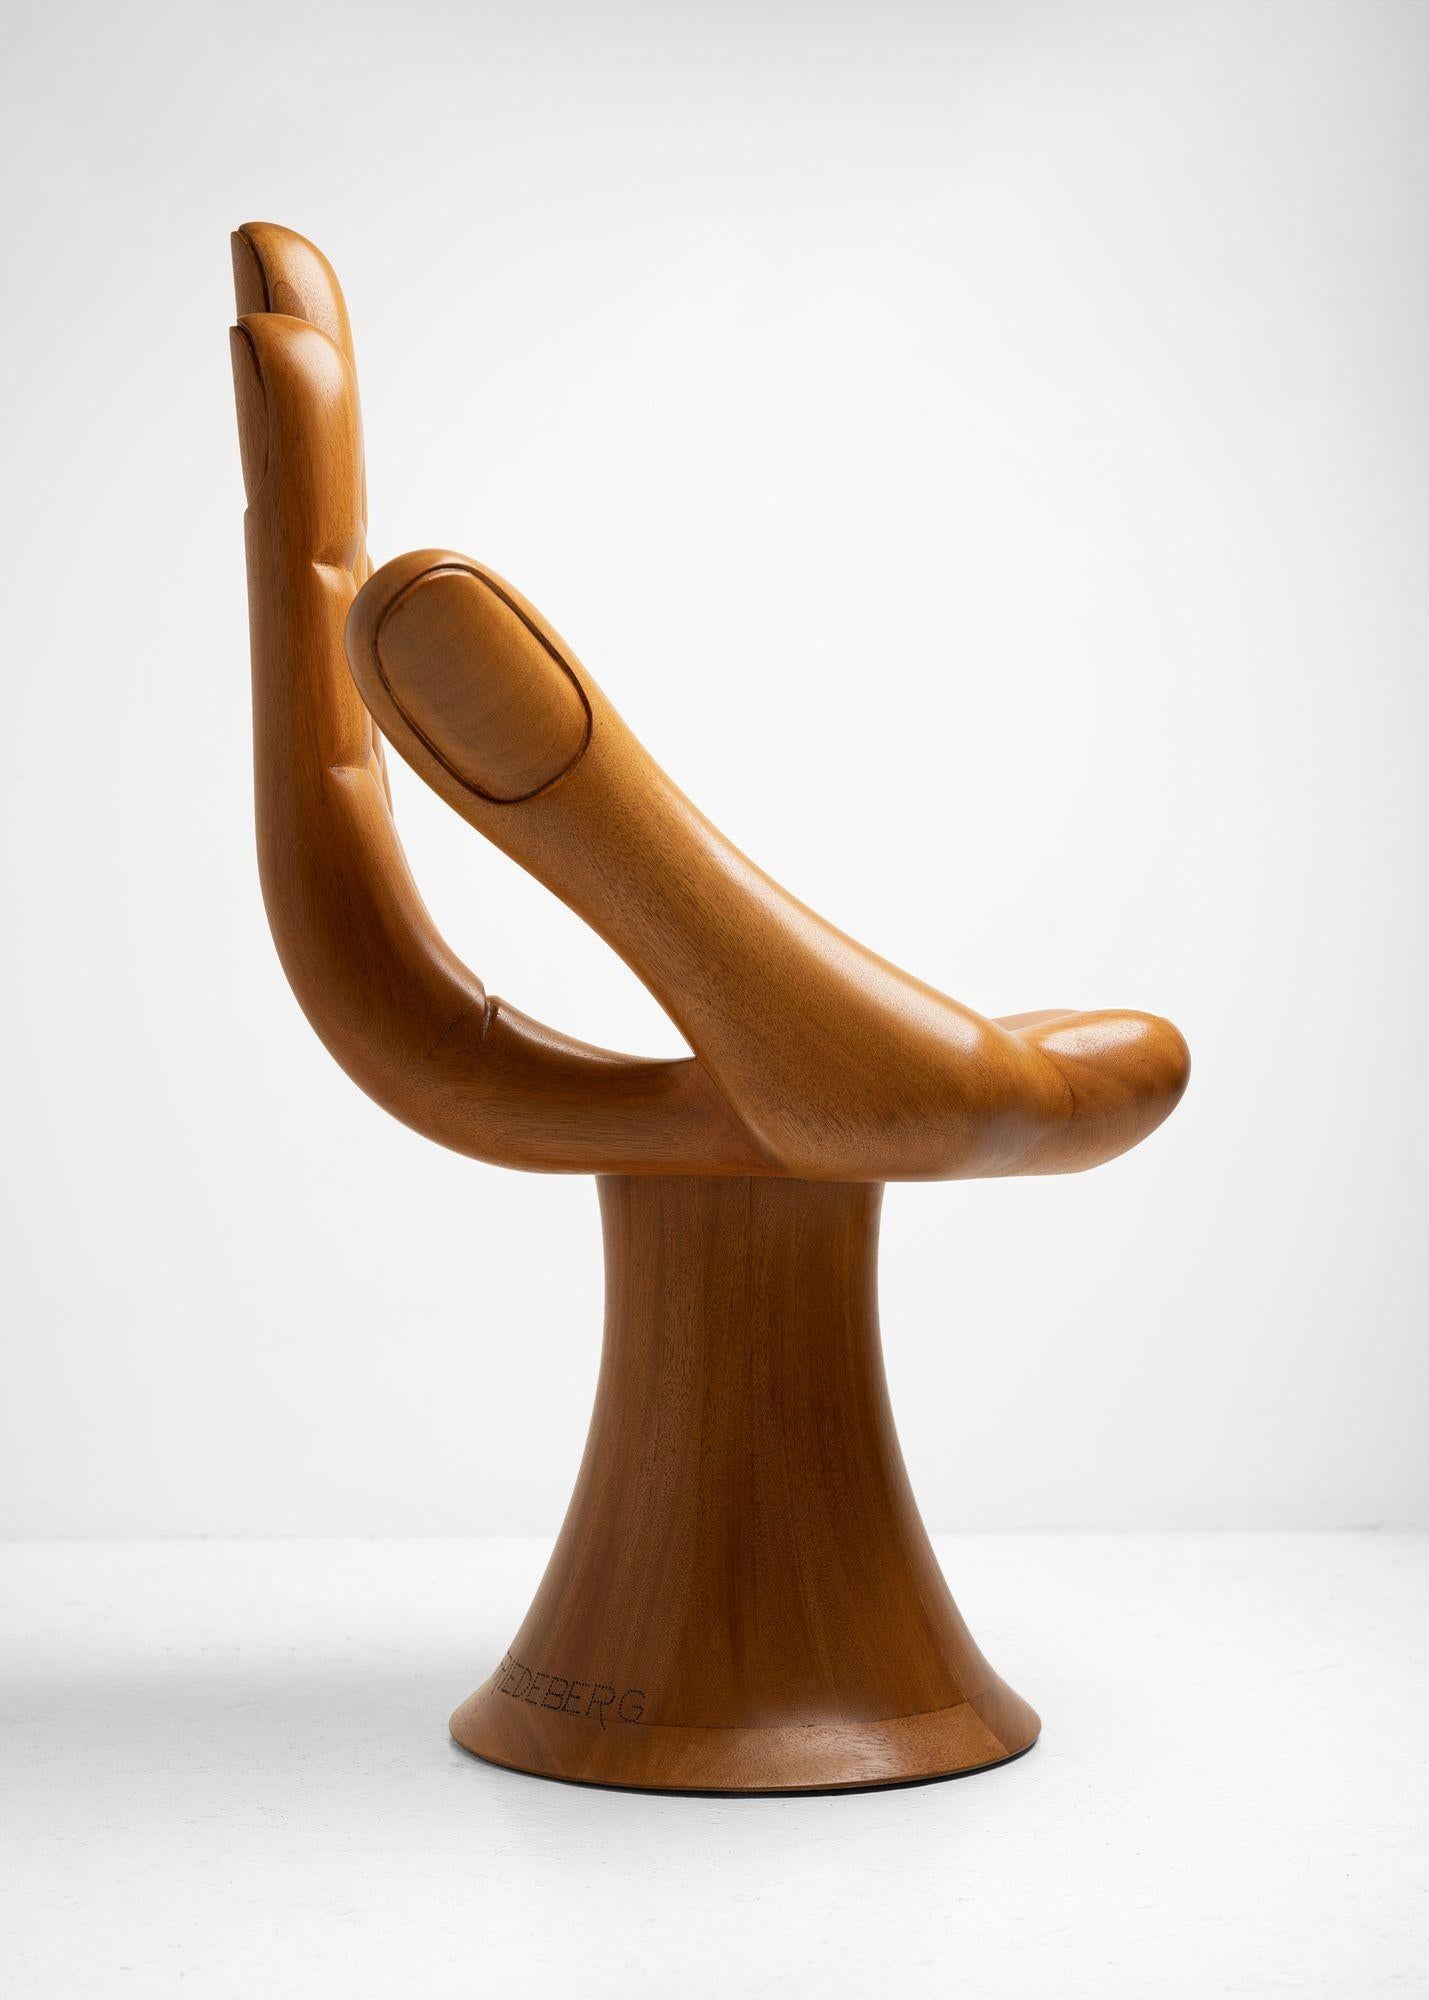 Mid-Century Modern Pedro Friedeberg Hand Chair in Solid Honduran Mahogany 1960s Signed For Sale